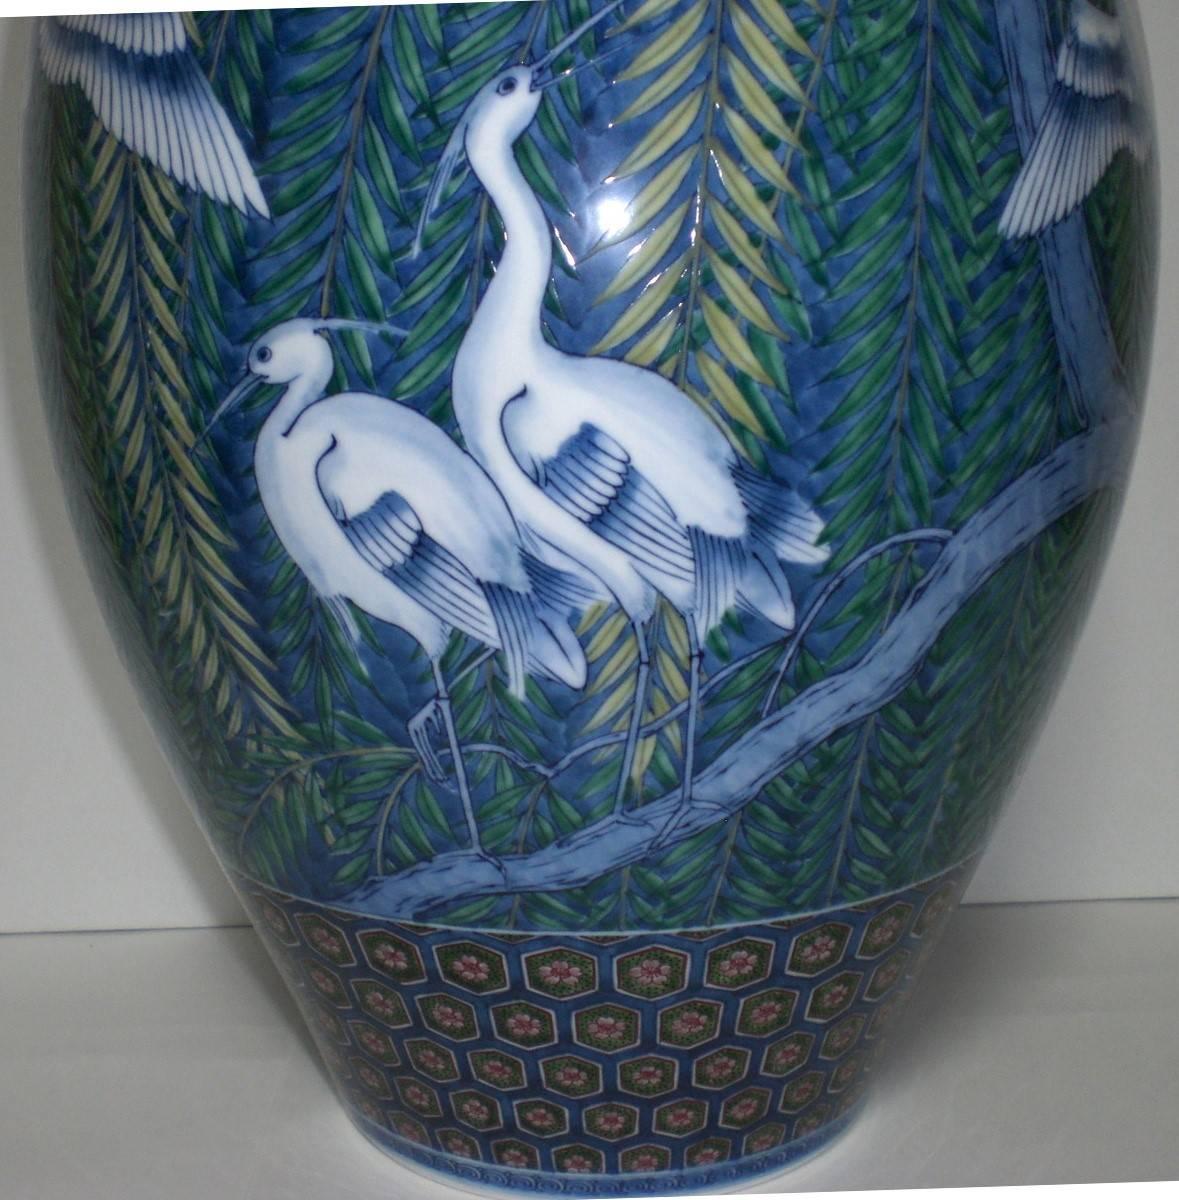 Hand-Painted Japanese Contemporary Porcelain Vase Green Blue White Red by Master Artist